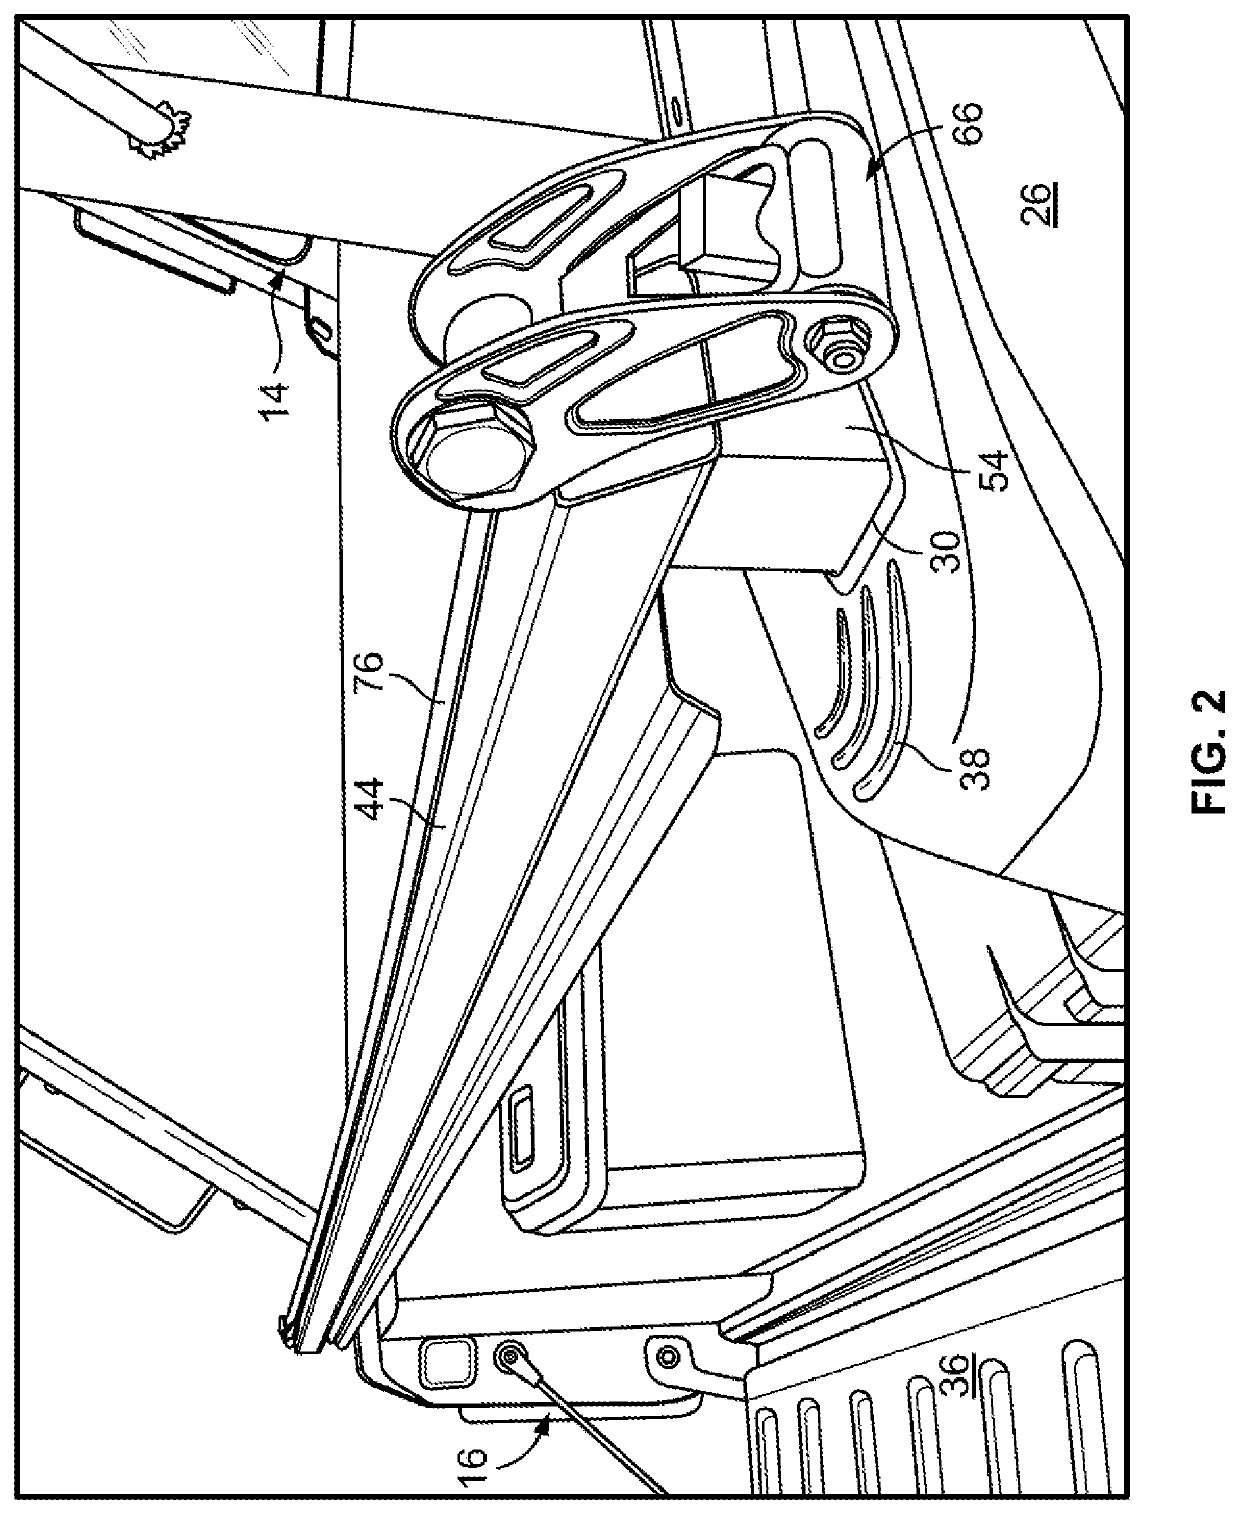 Tailgate saver system and method